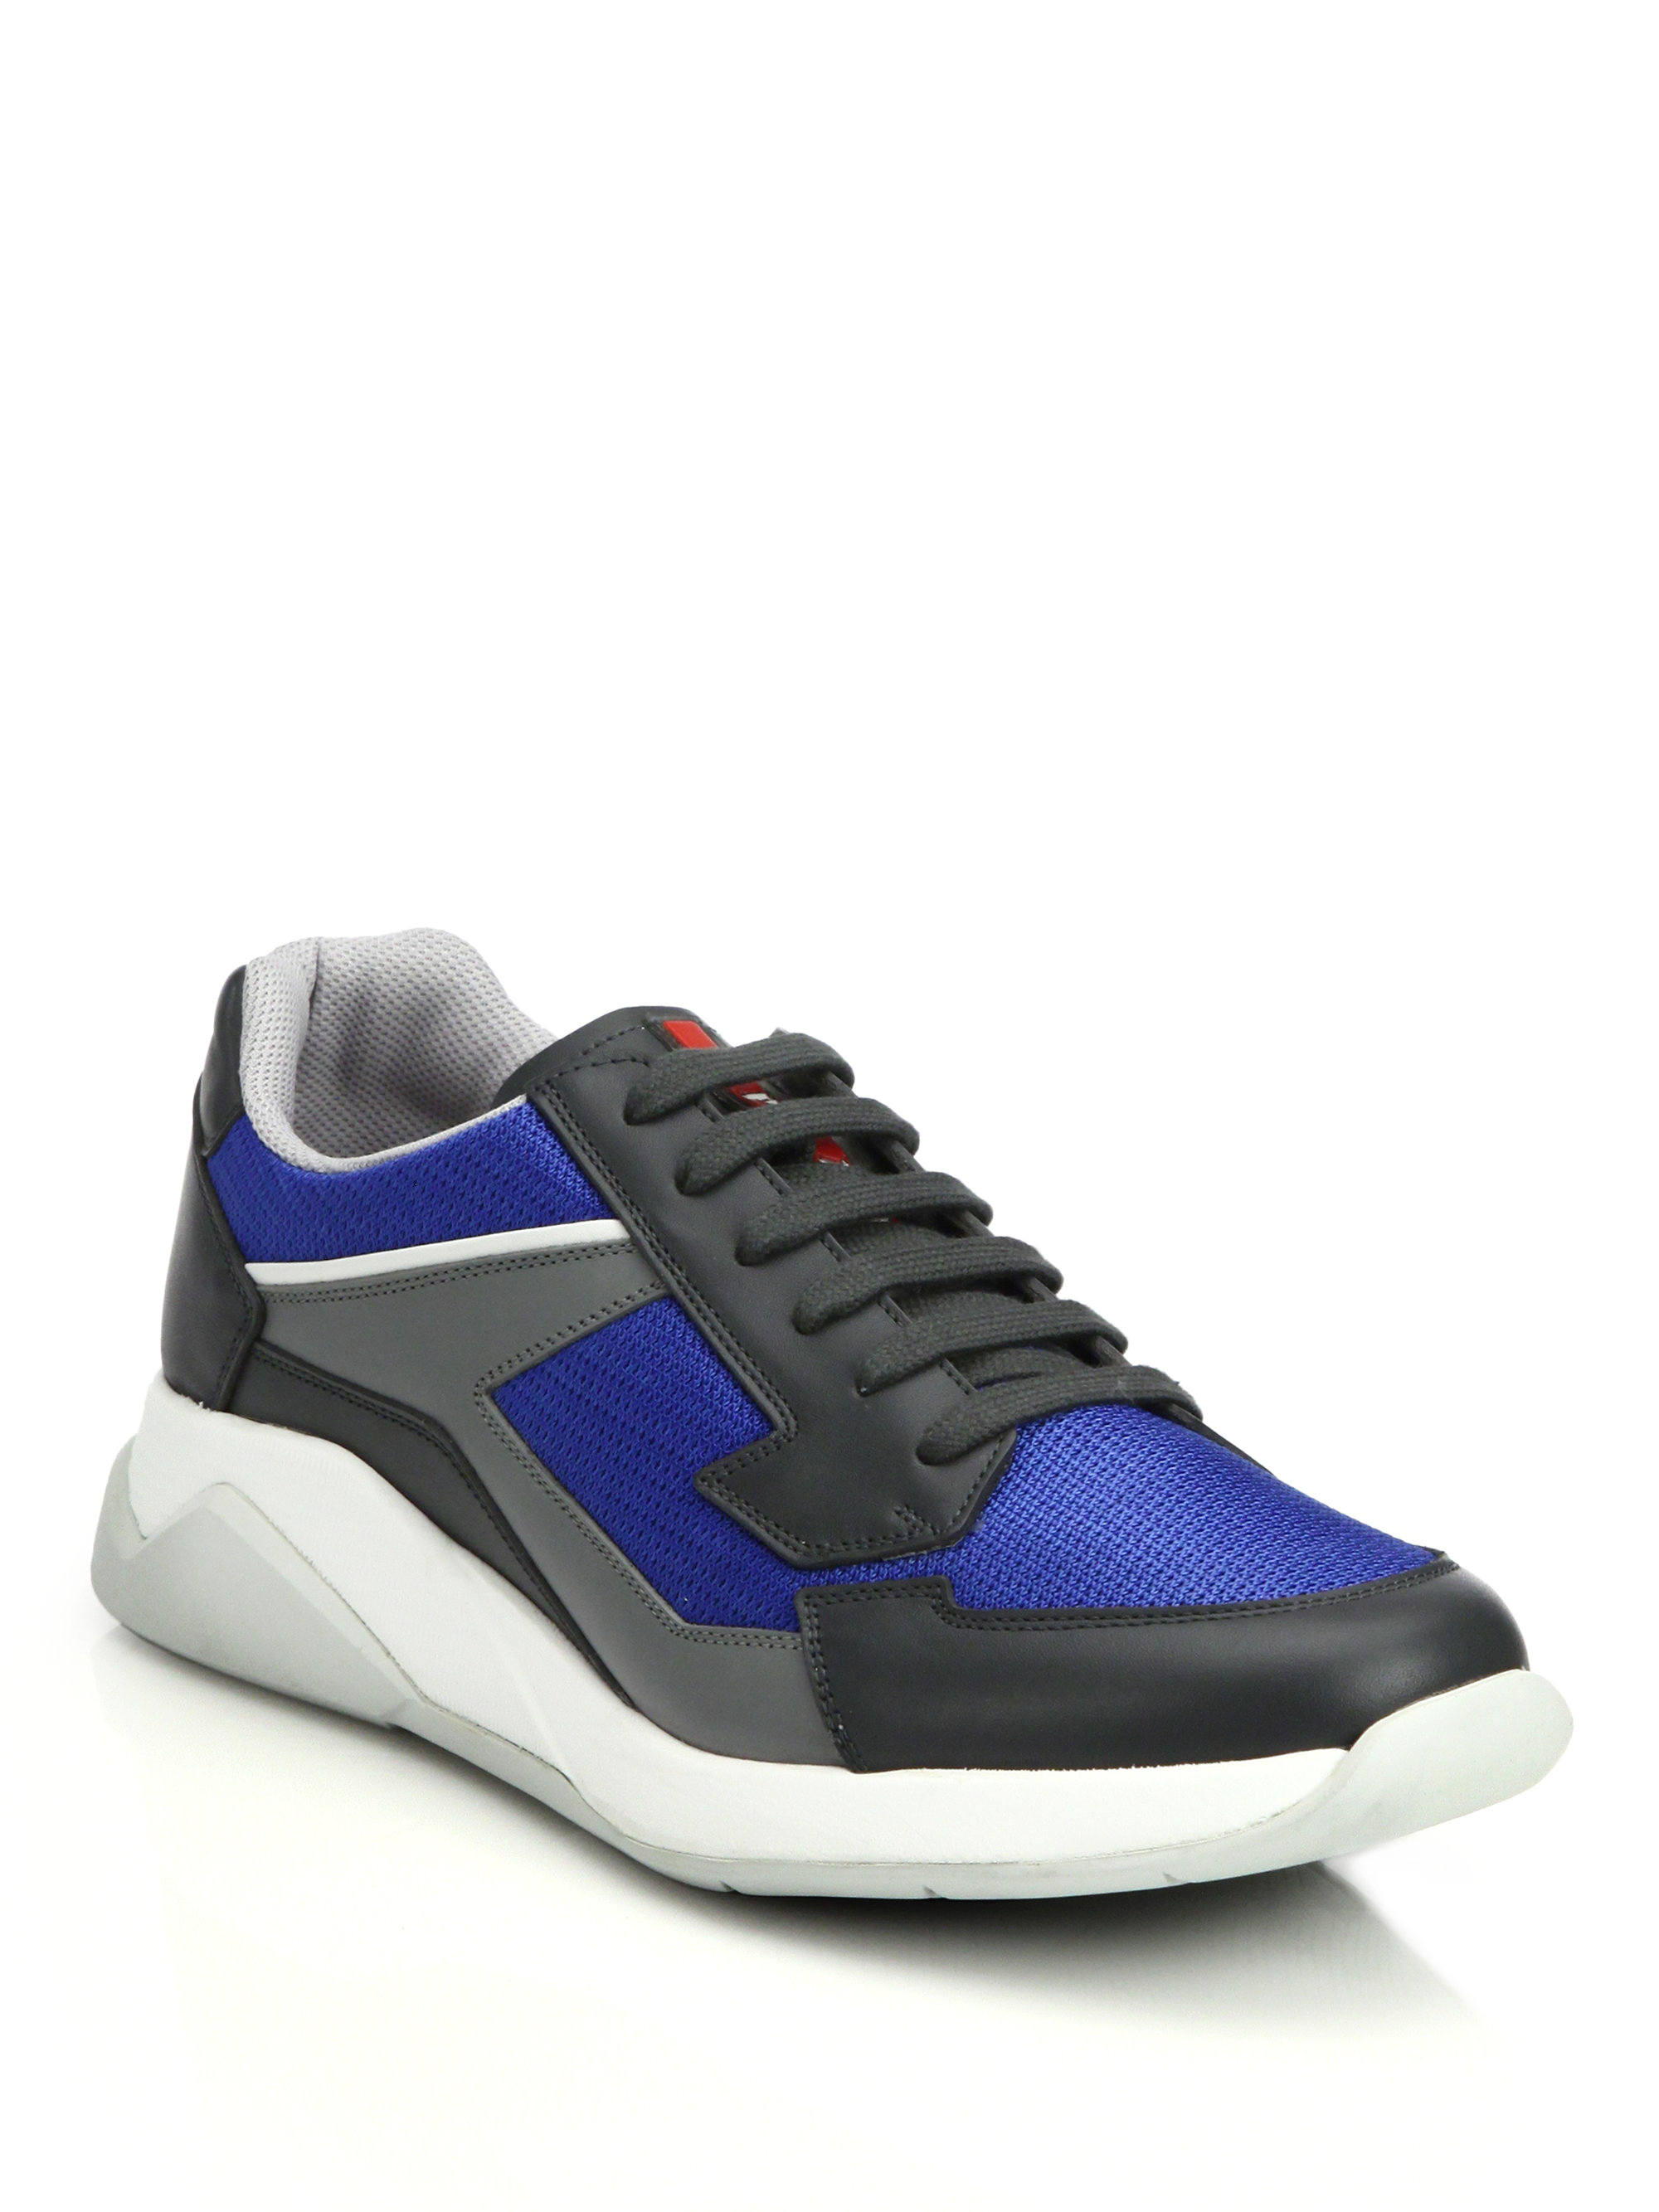 Prada Running Sneakers in Gray (ANTHRACITE-BLUE) | Lyst